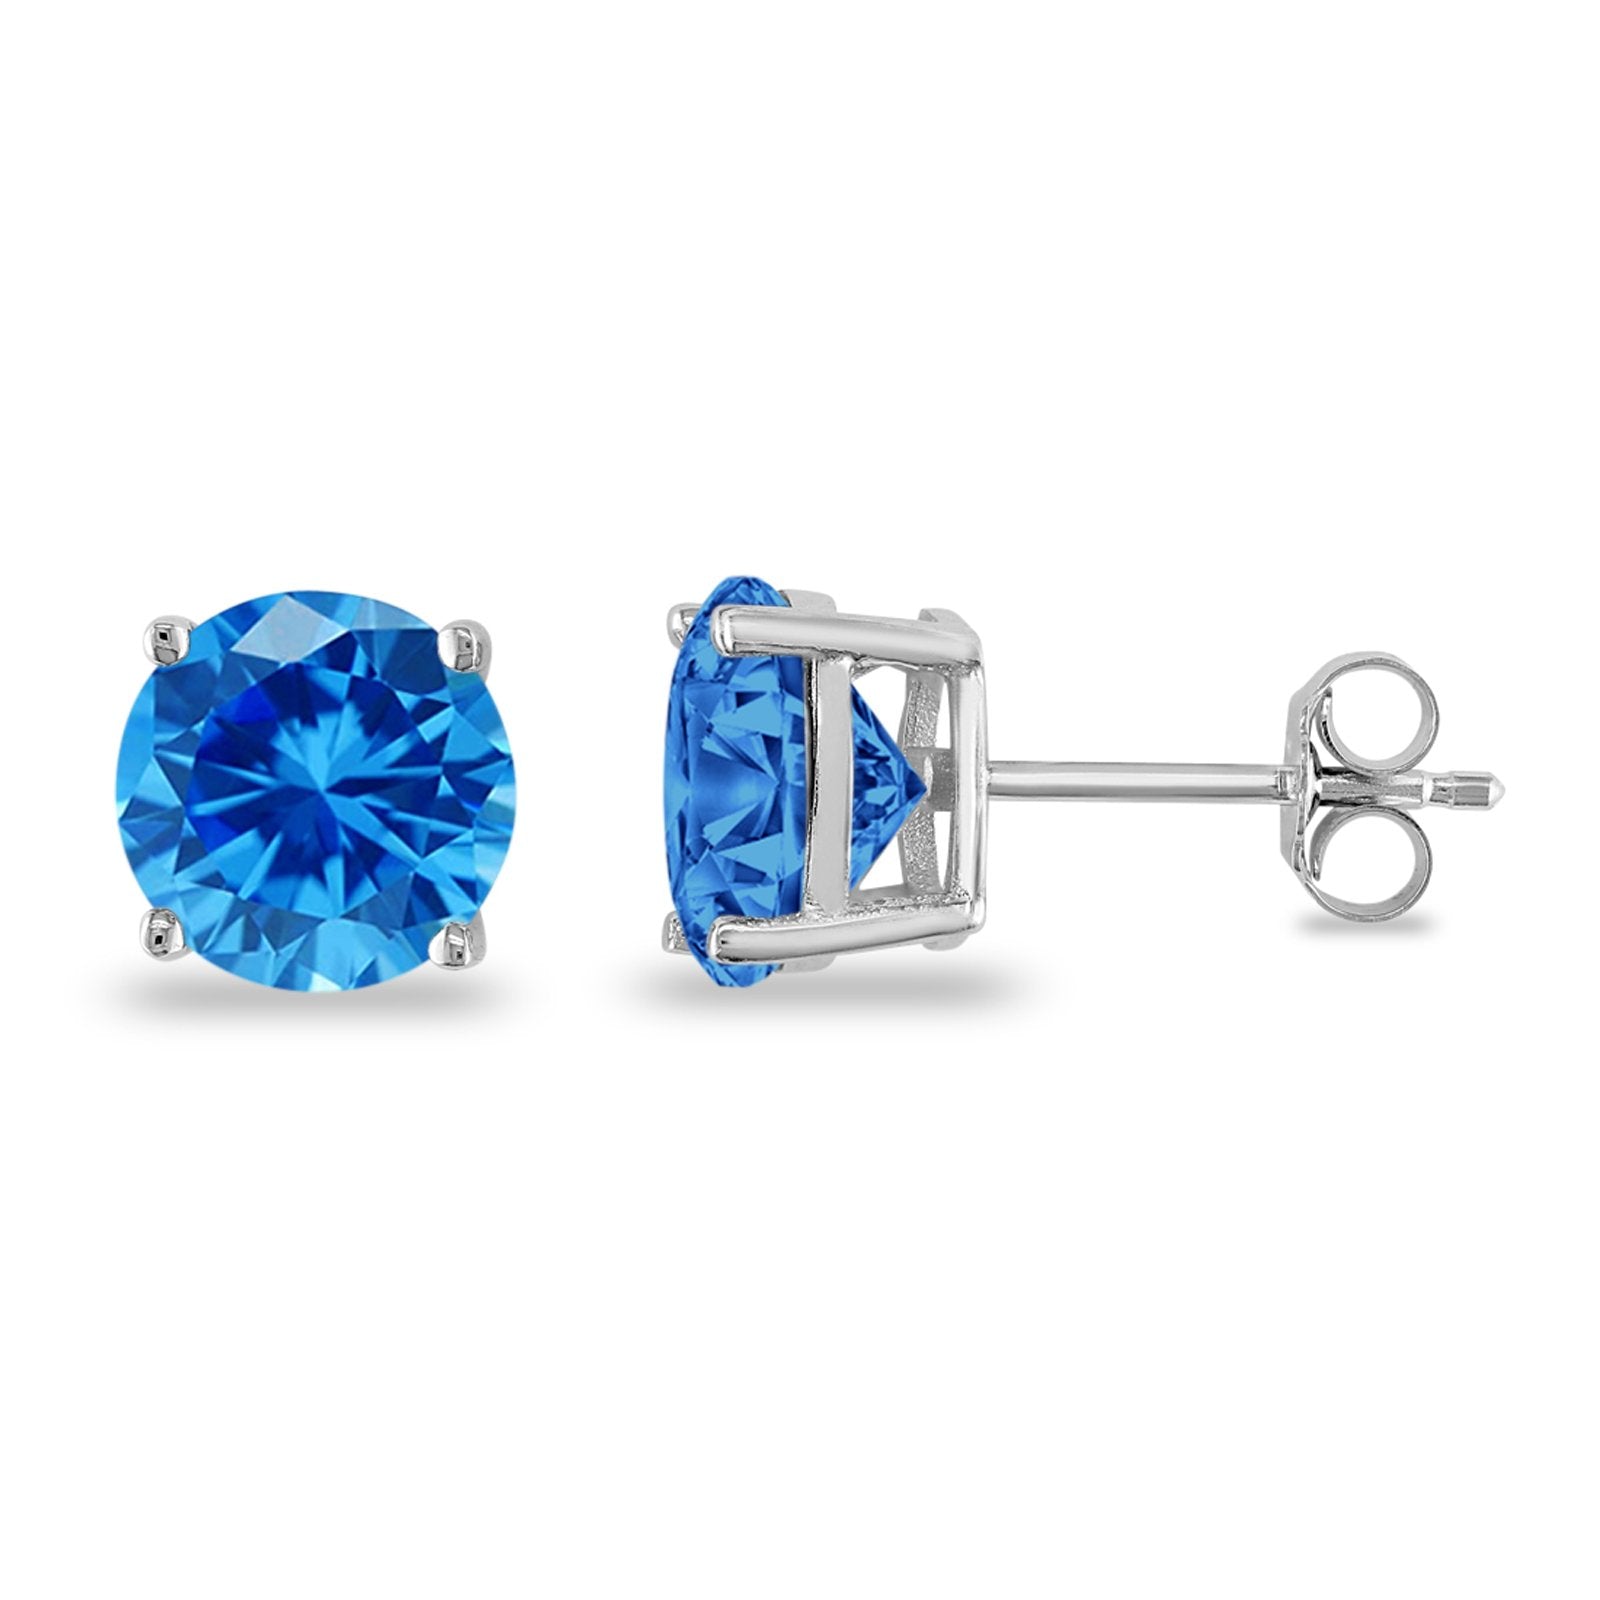 Butterfly Prong Round Simulated Blue Topaz CZ Stud Earrings 925 Sterling Silver